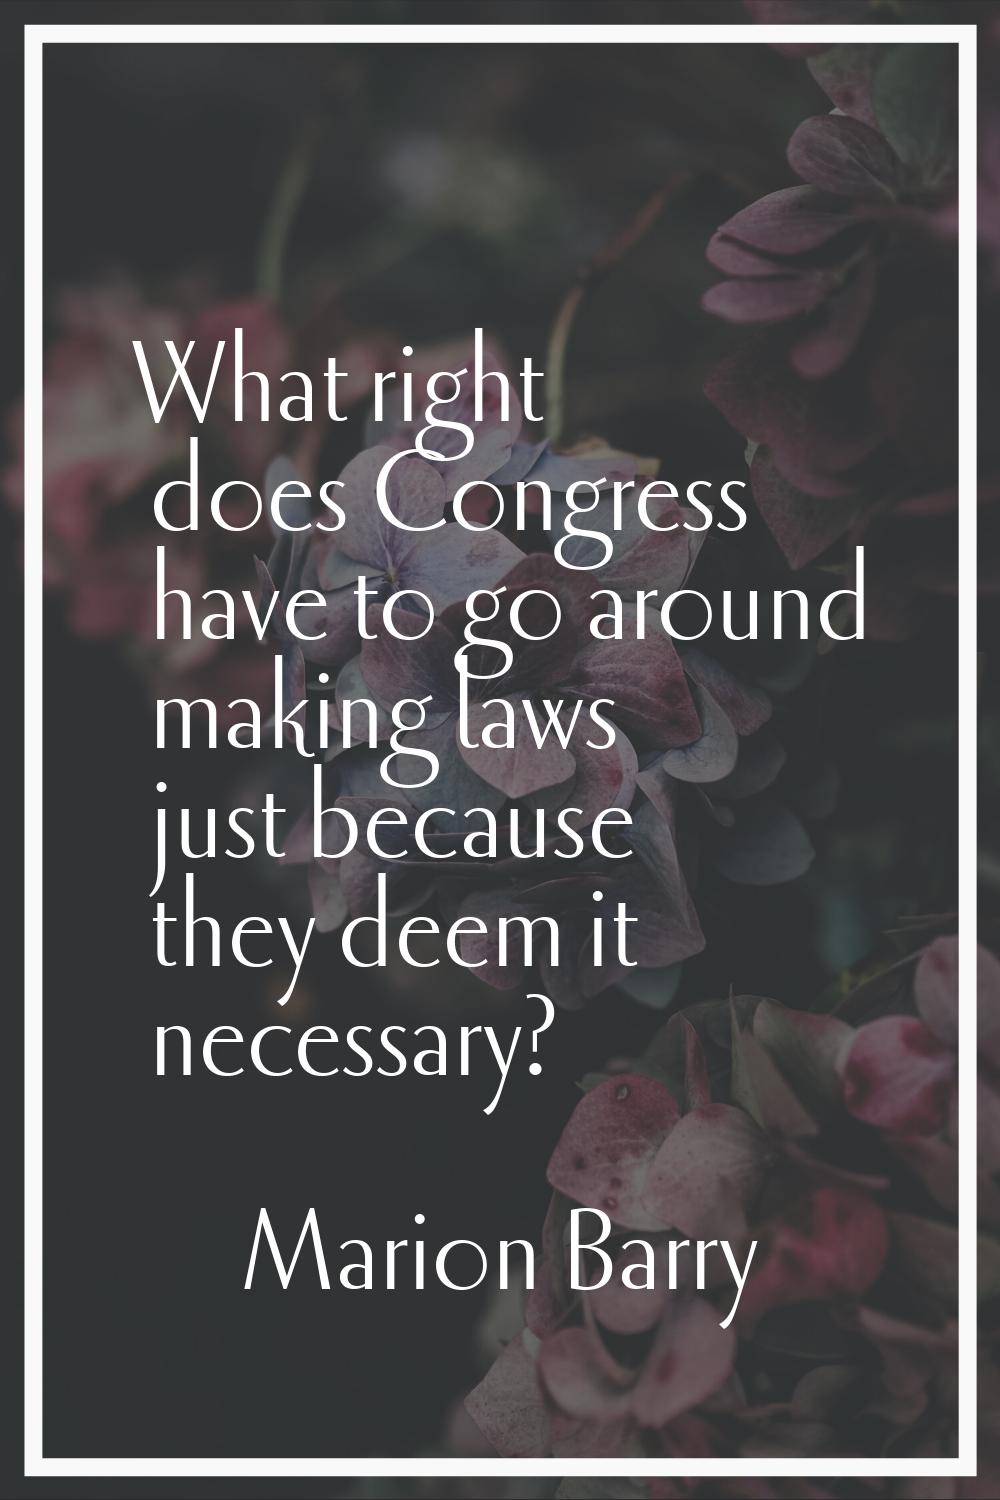 What right does Congress have to go around making laws just because they deem it necessary?